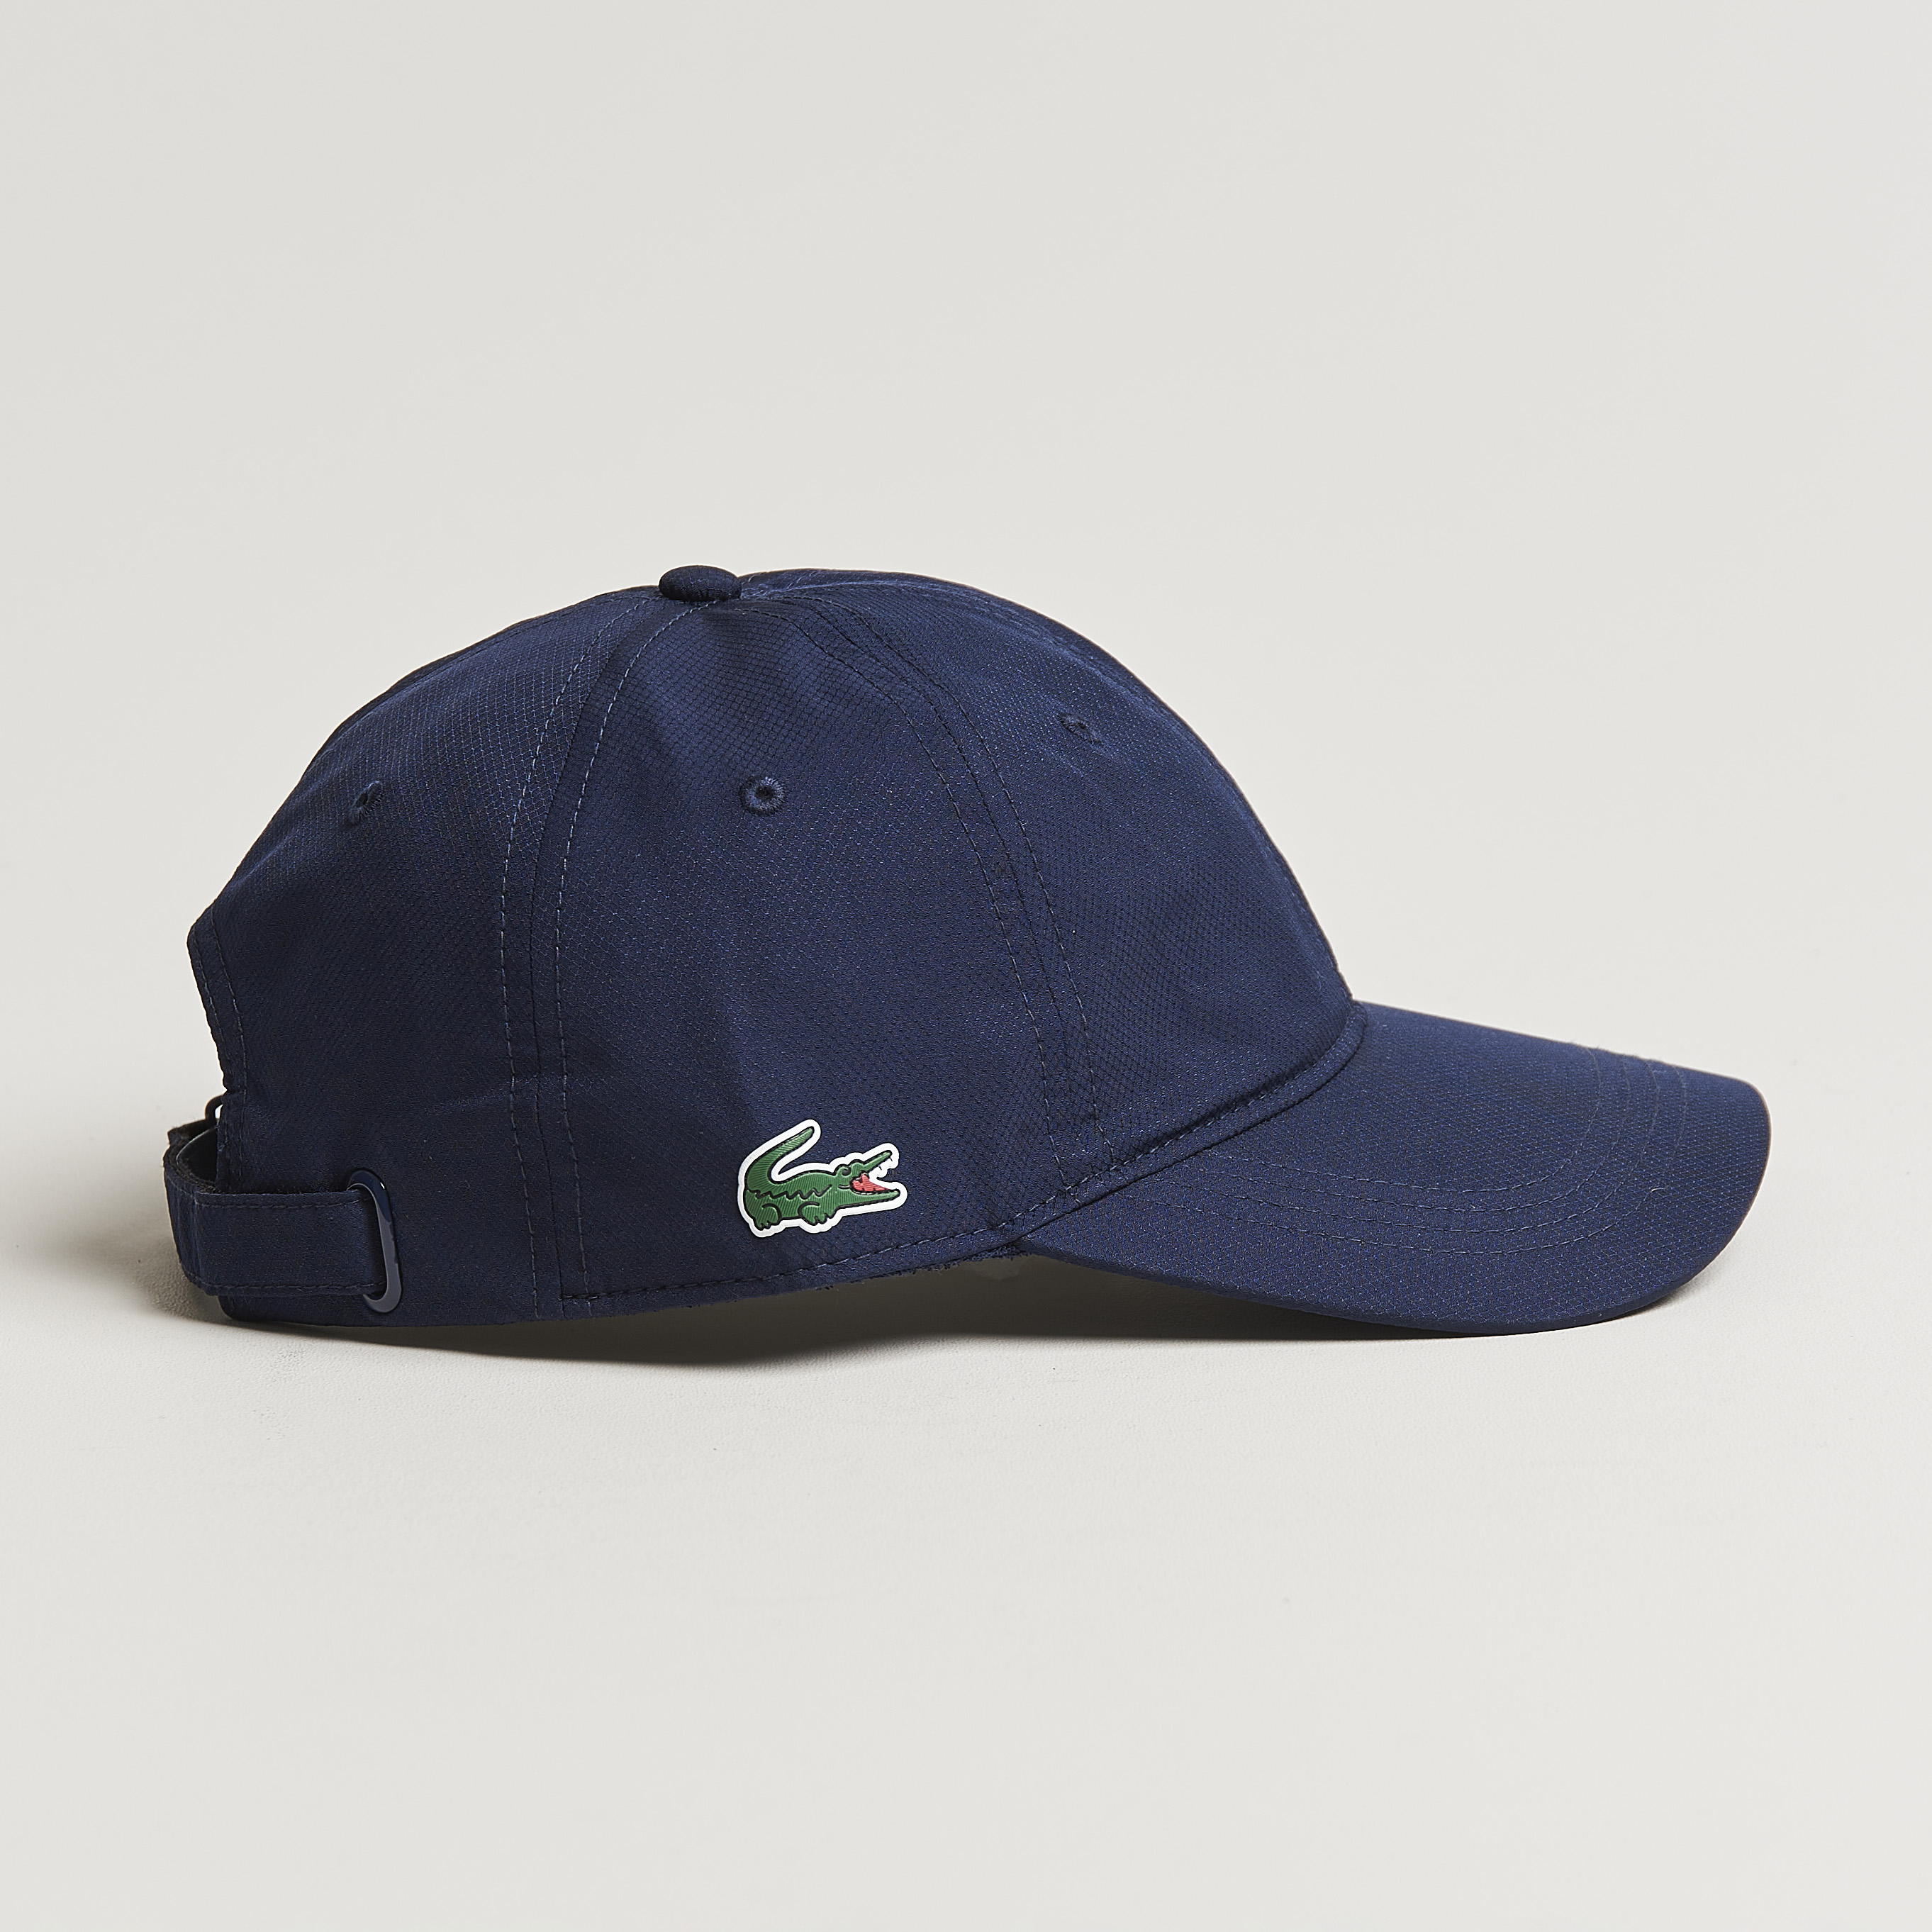 Lacoste Sport Sports at Navy Cap